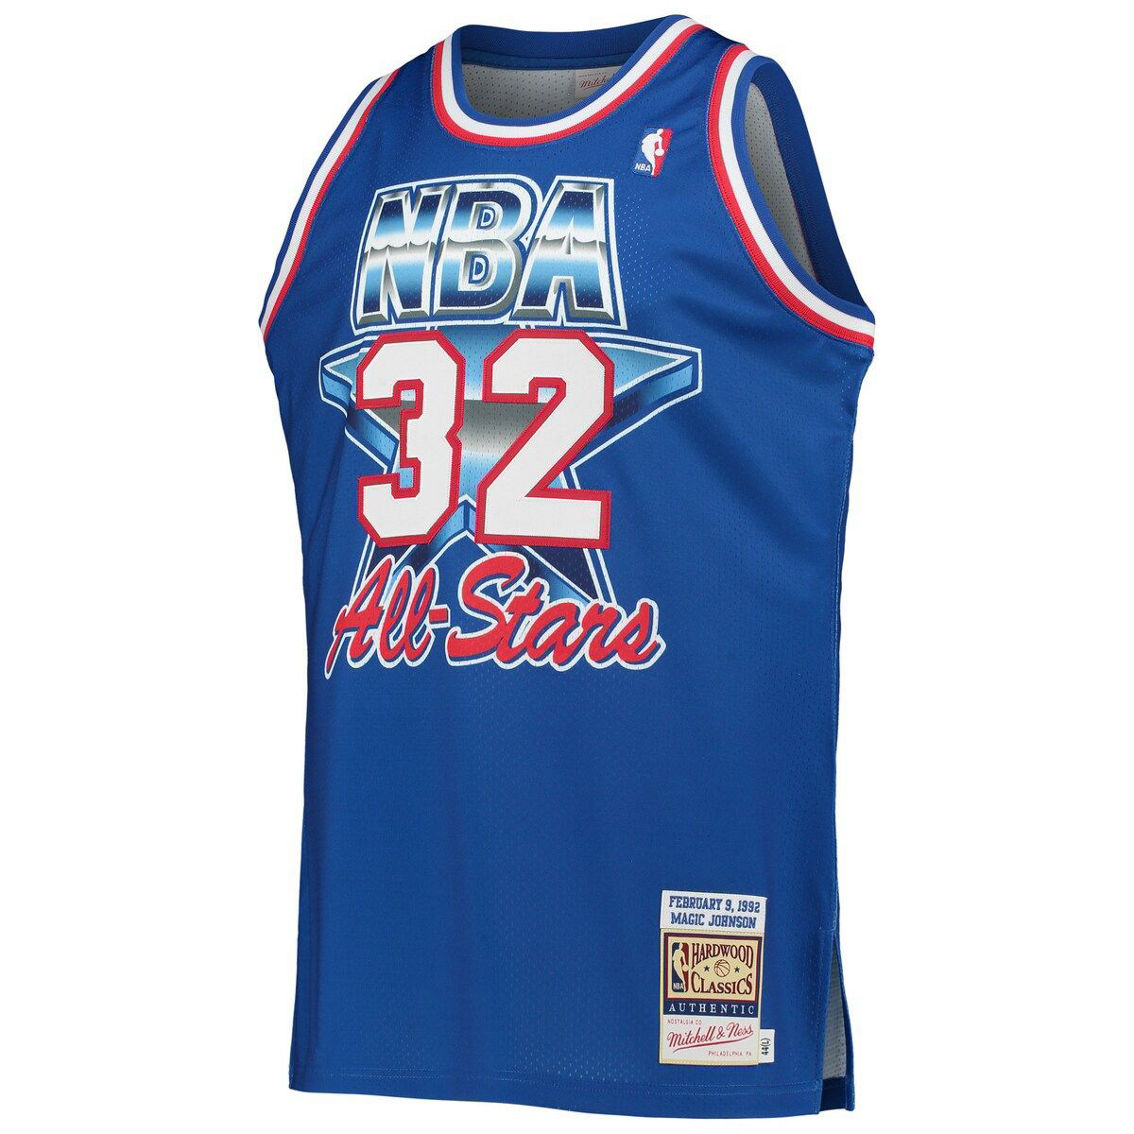 Mitchell & Ness Men's Magic Johnson Royal Western Conference Hardwood Classics 1992 NBA All-Star Game Authentic Jersey - Image 3 of 4